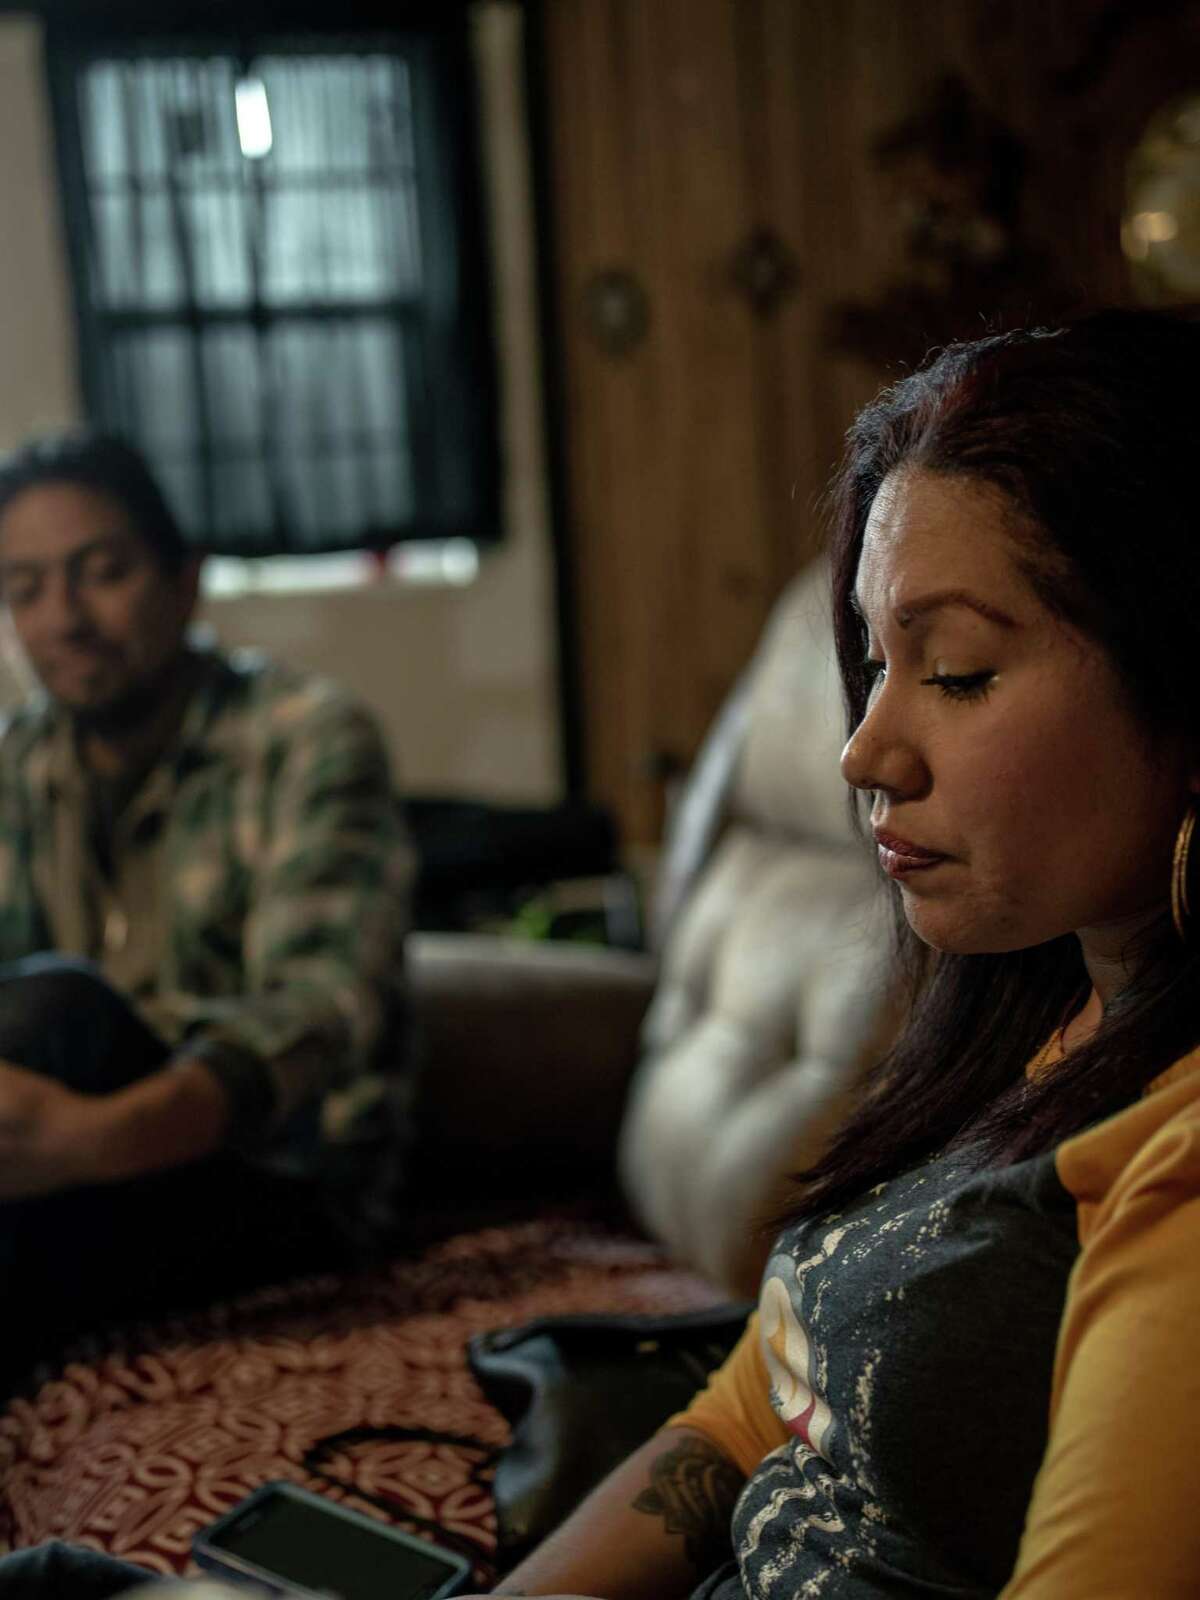 Christina Gutierrez, 34, right, pauses a moment during her recounting of the brutal dog attack she suffered on Jan. 4 while she was walking to walk along a South Side street. She suffered serious leg injuries and was bleeding badly when a passerby stopped to help her, chasing off the dogs and staying with her until the ambulance arrived. Gutierrez is expected to spend 6 months recovering and will then have to undergo physical therapy.